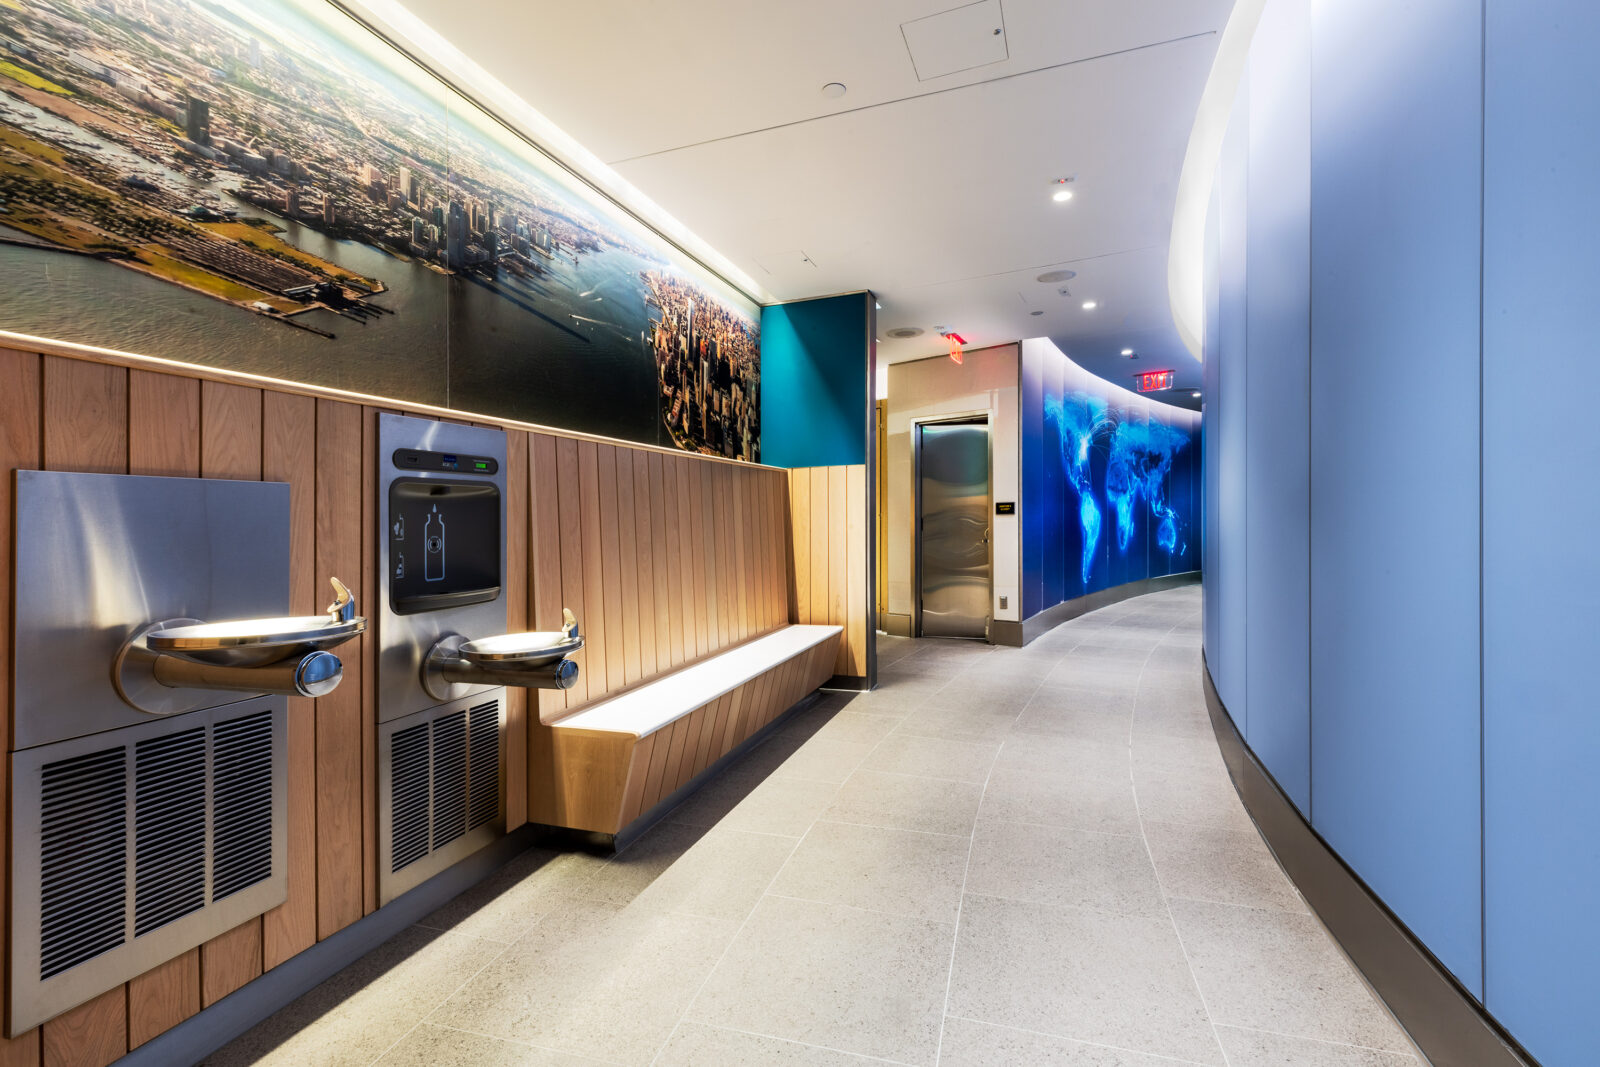 2 airports are finalists for America’s Best Restroom